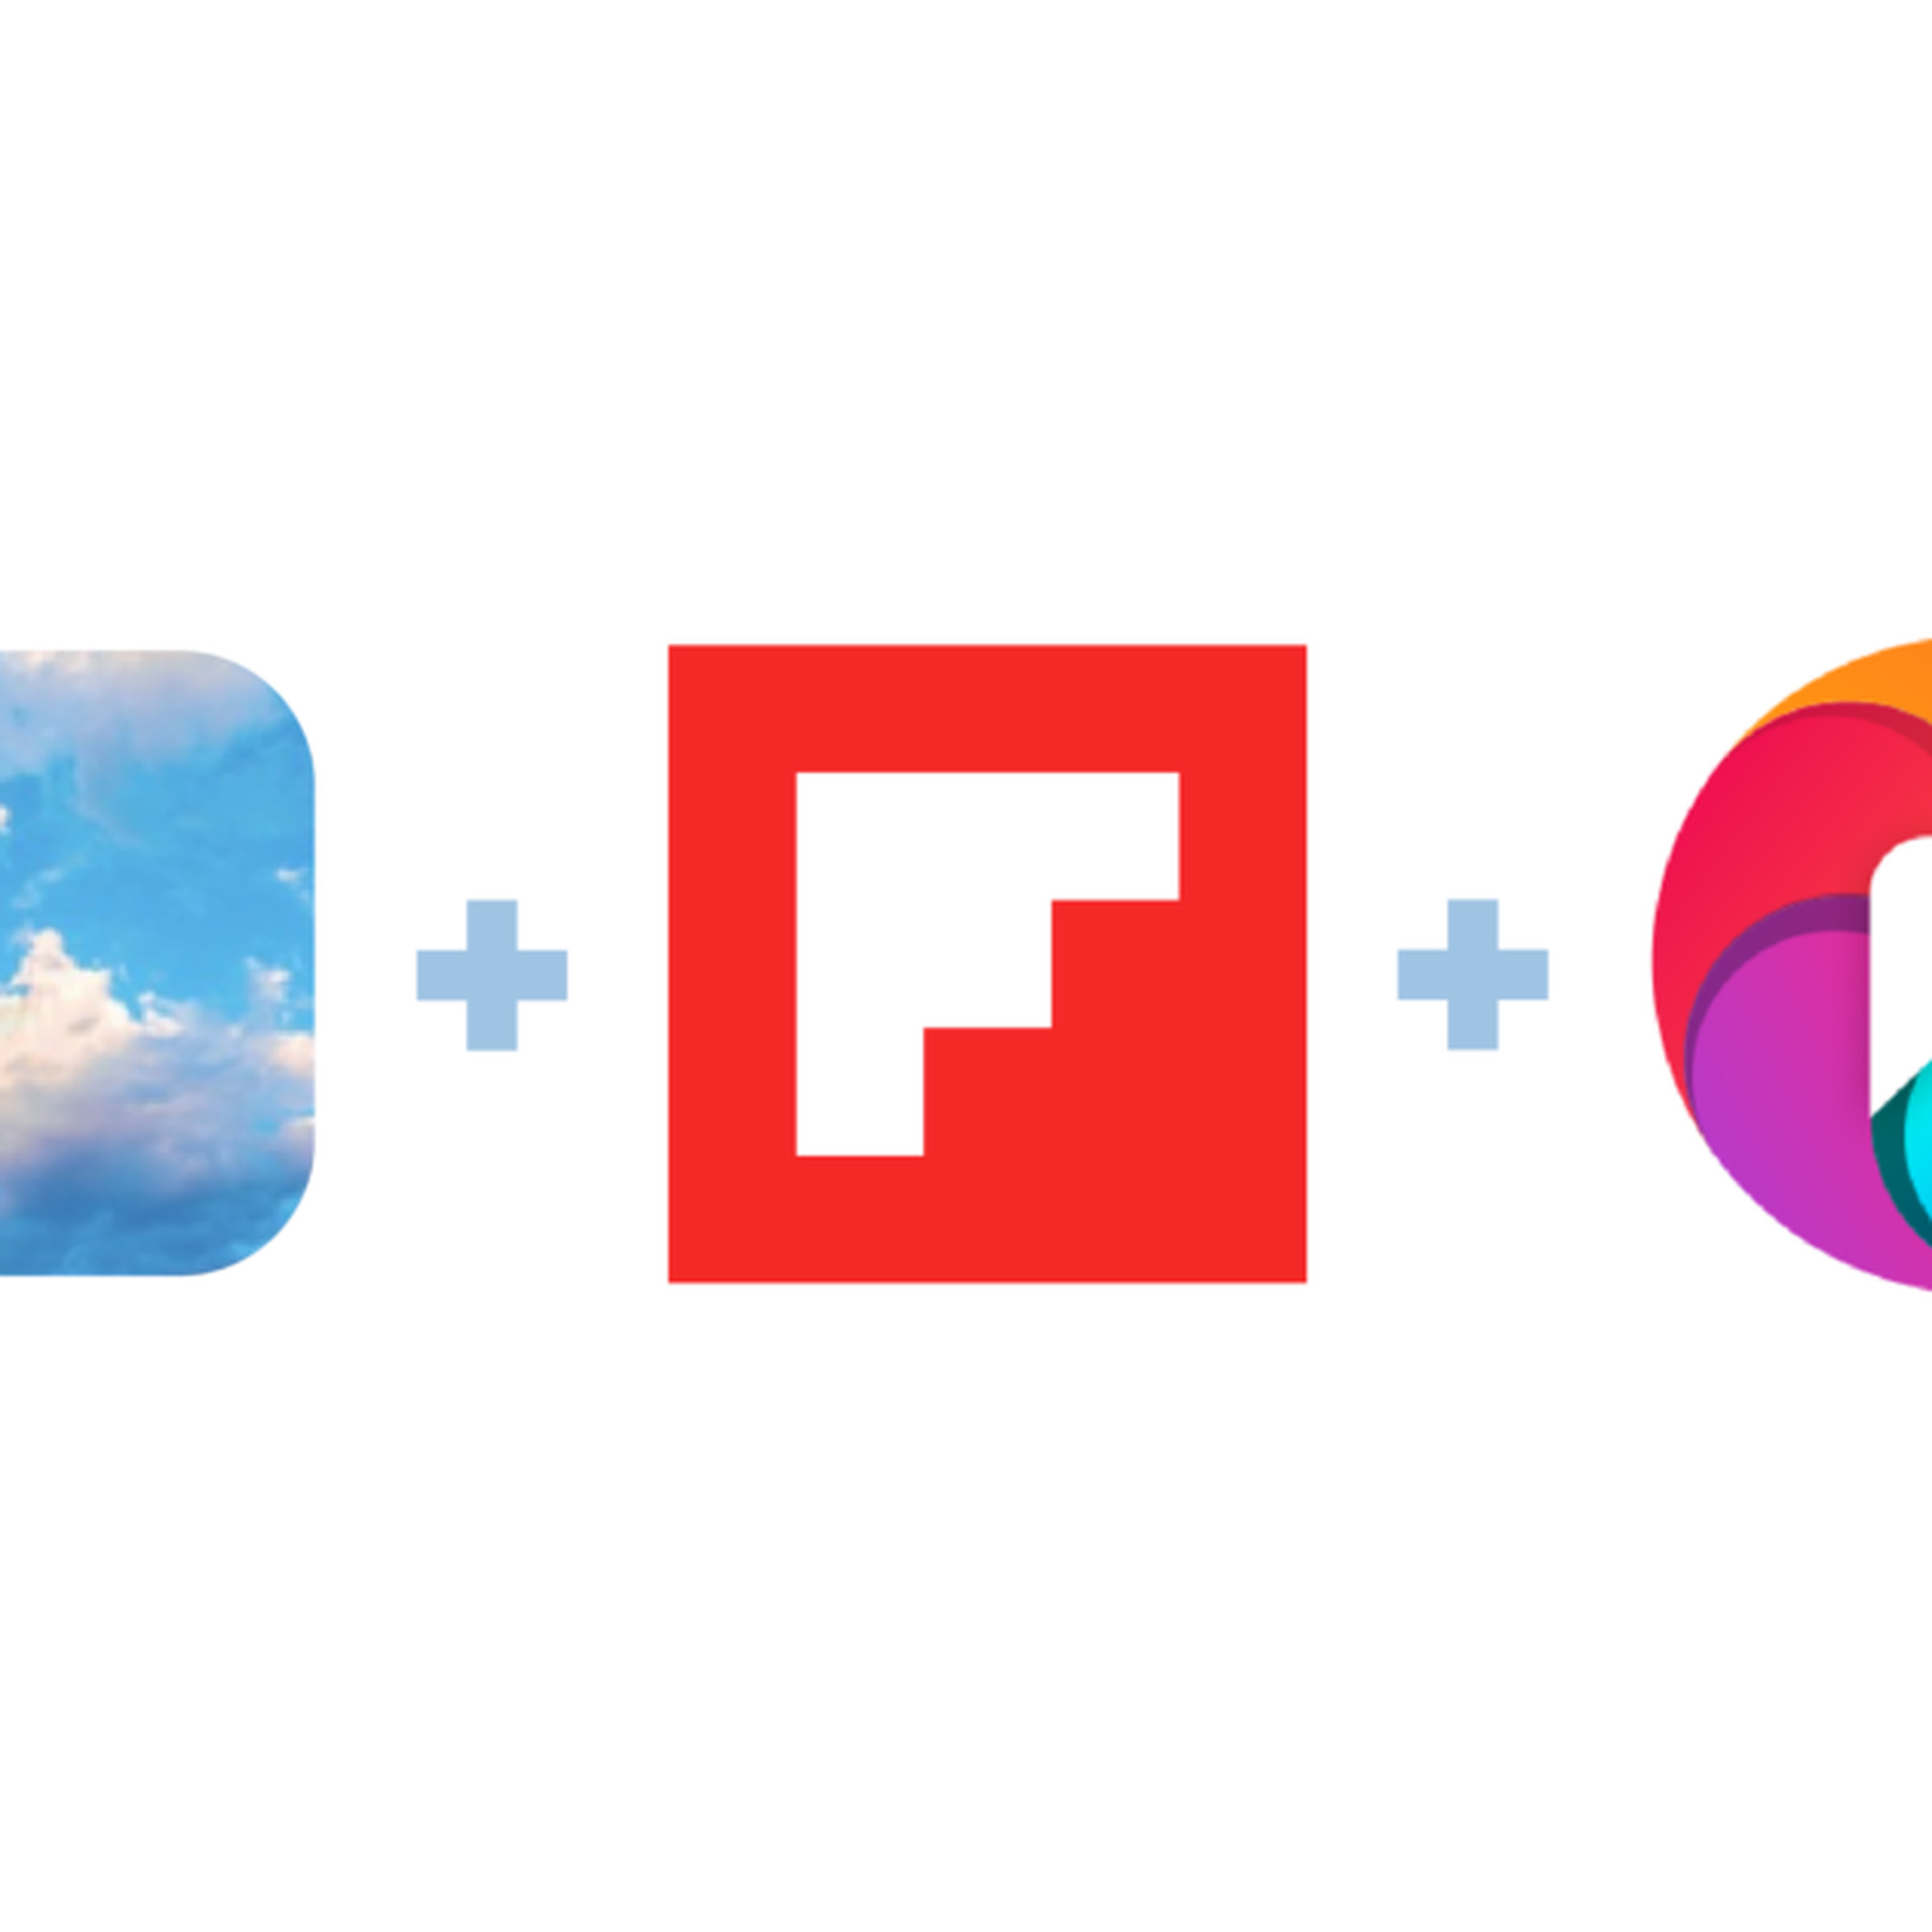 An image of the three icons for Bluesky, Flipboard, and Pixelfed, with plus signs between them.